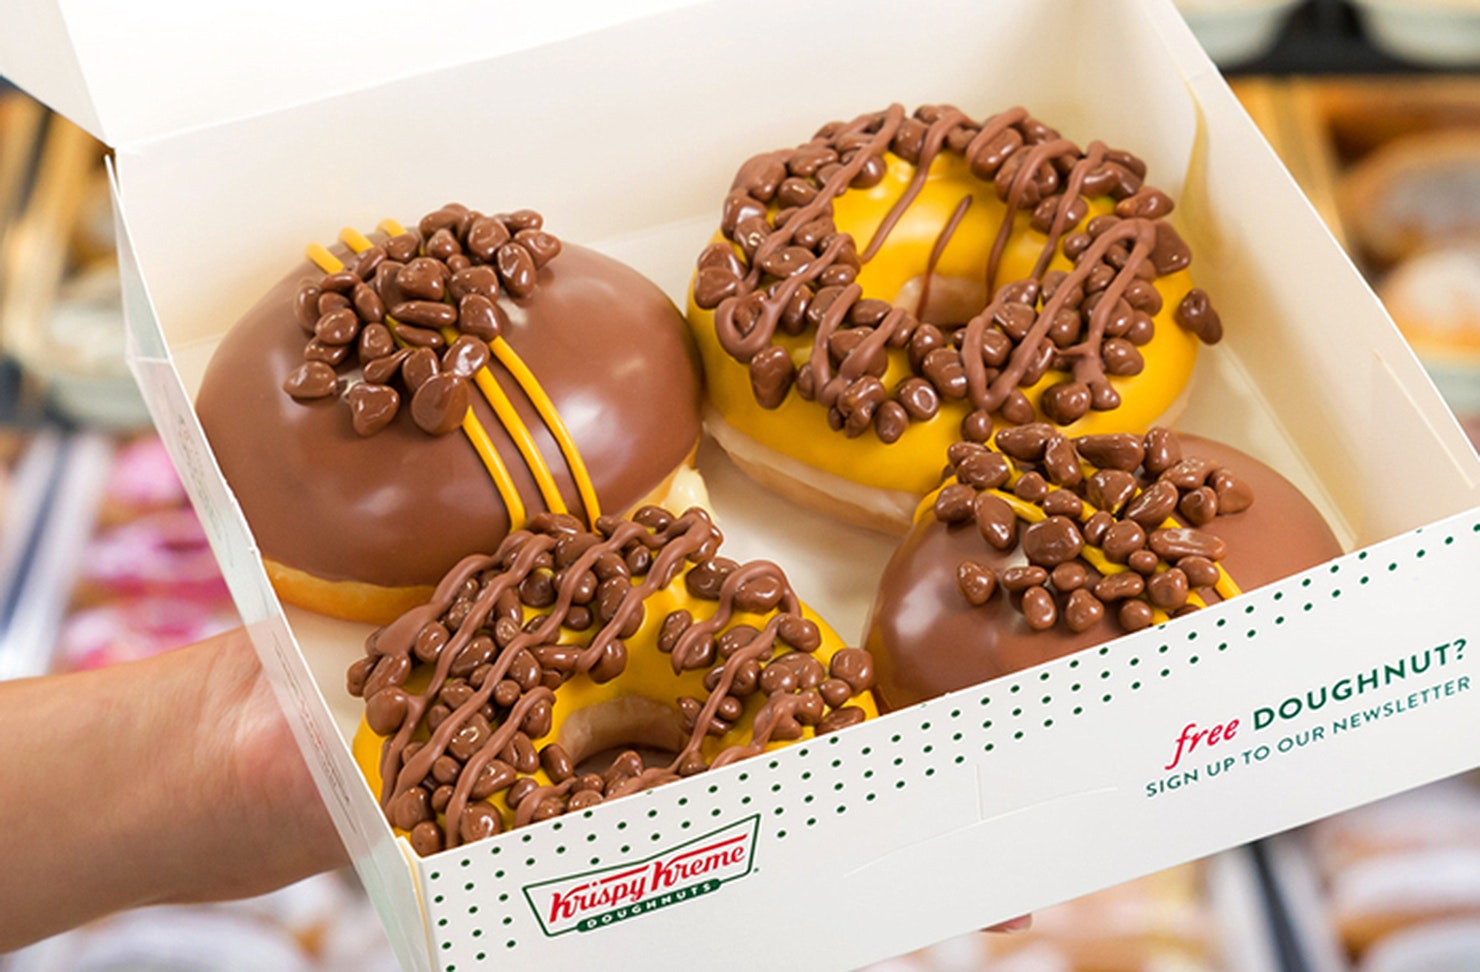 A new distribution strategy for Krispy Kreme in the United States